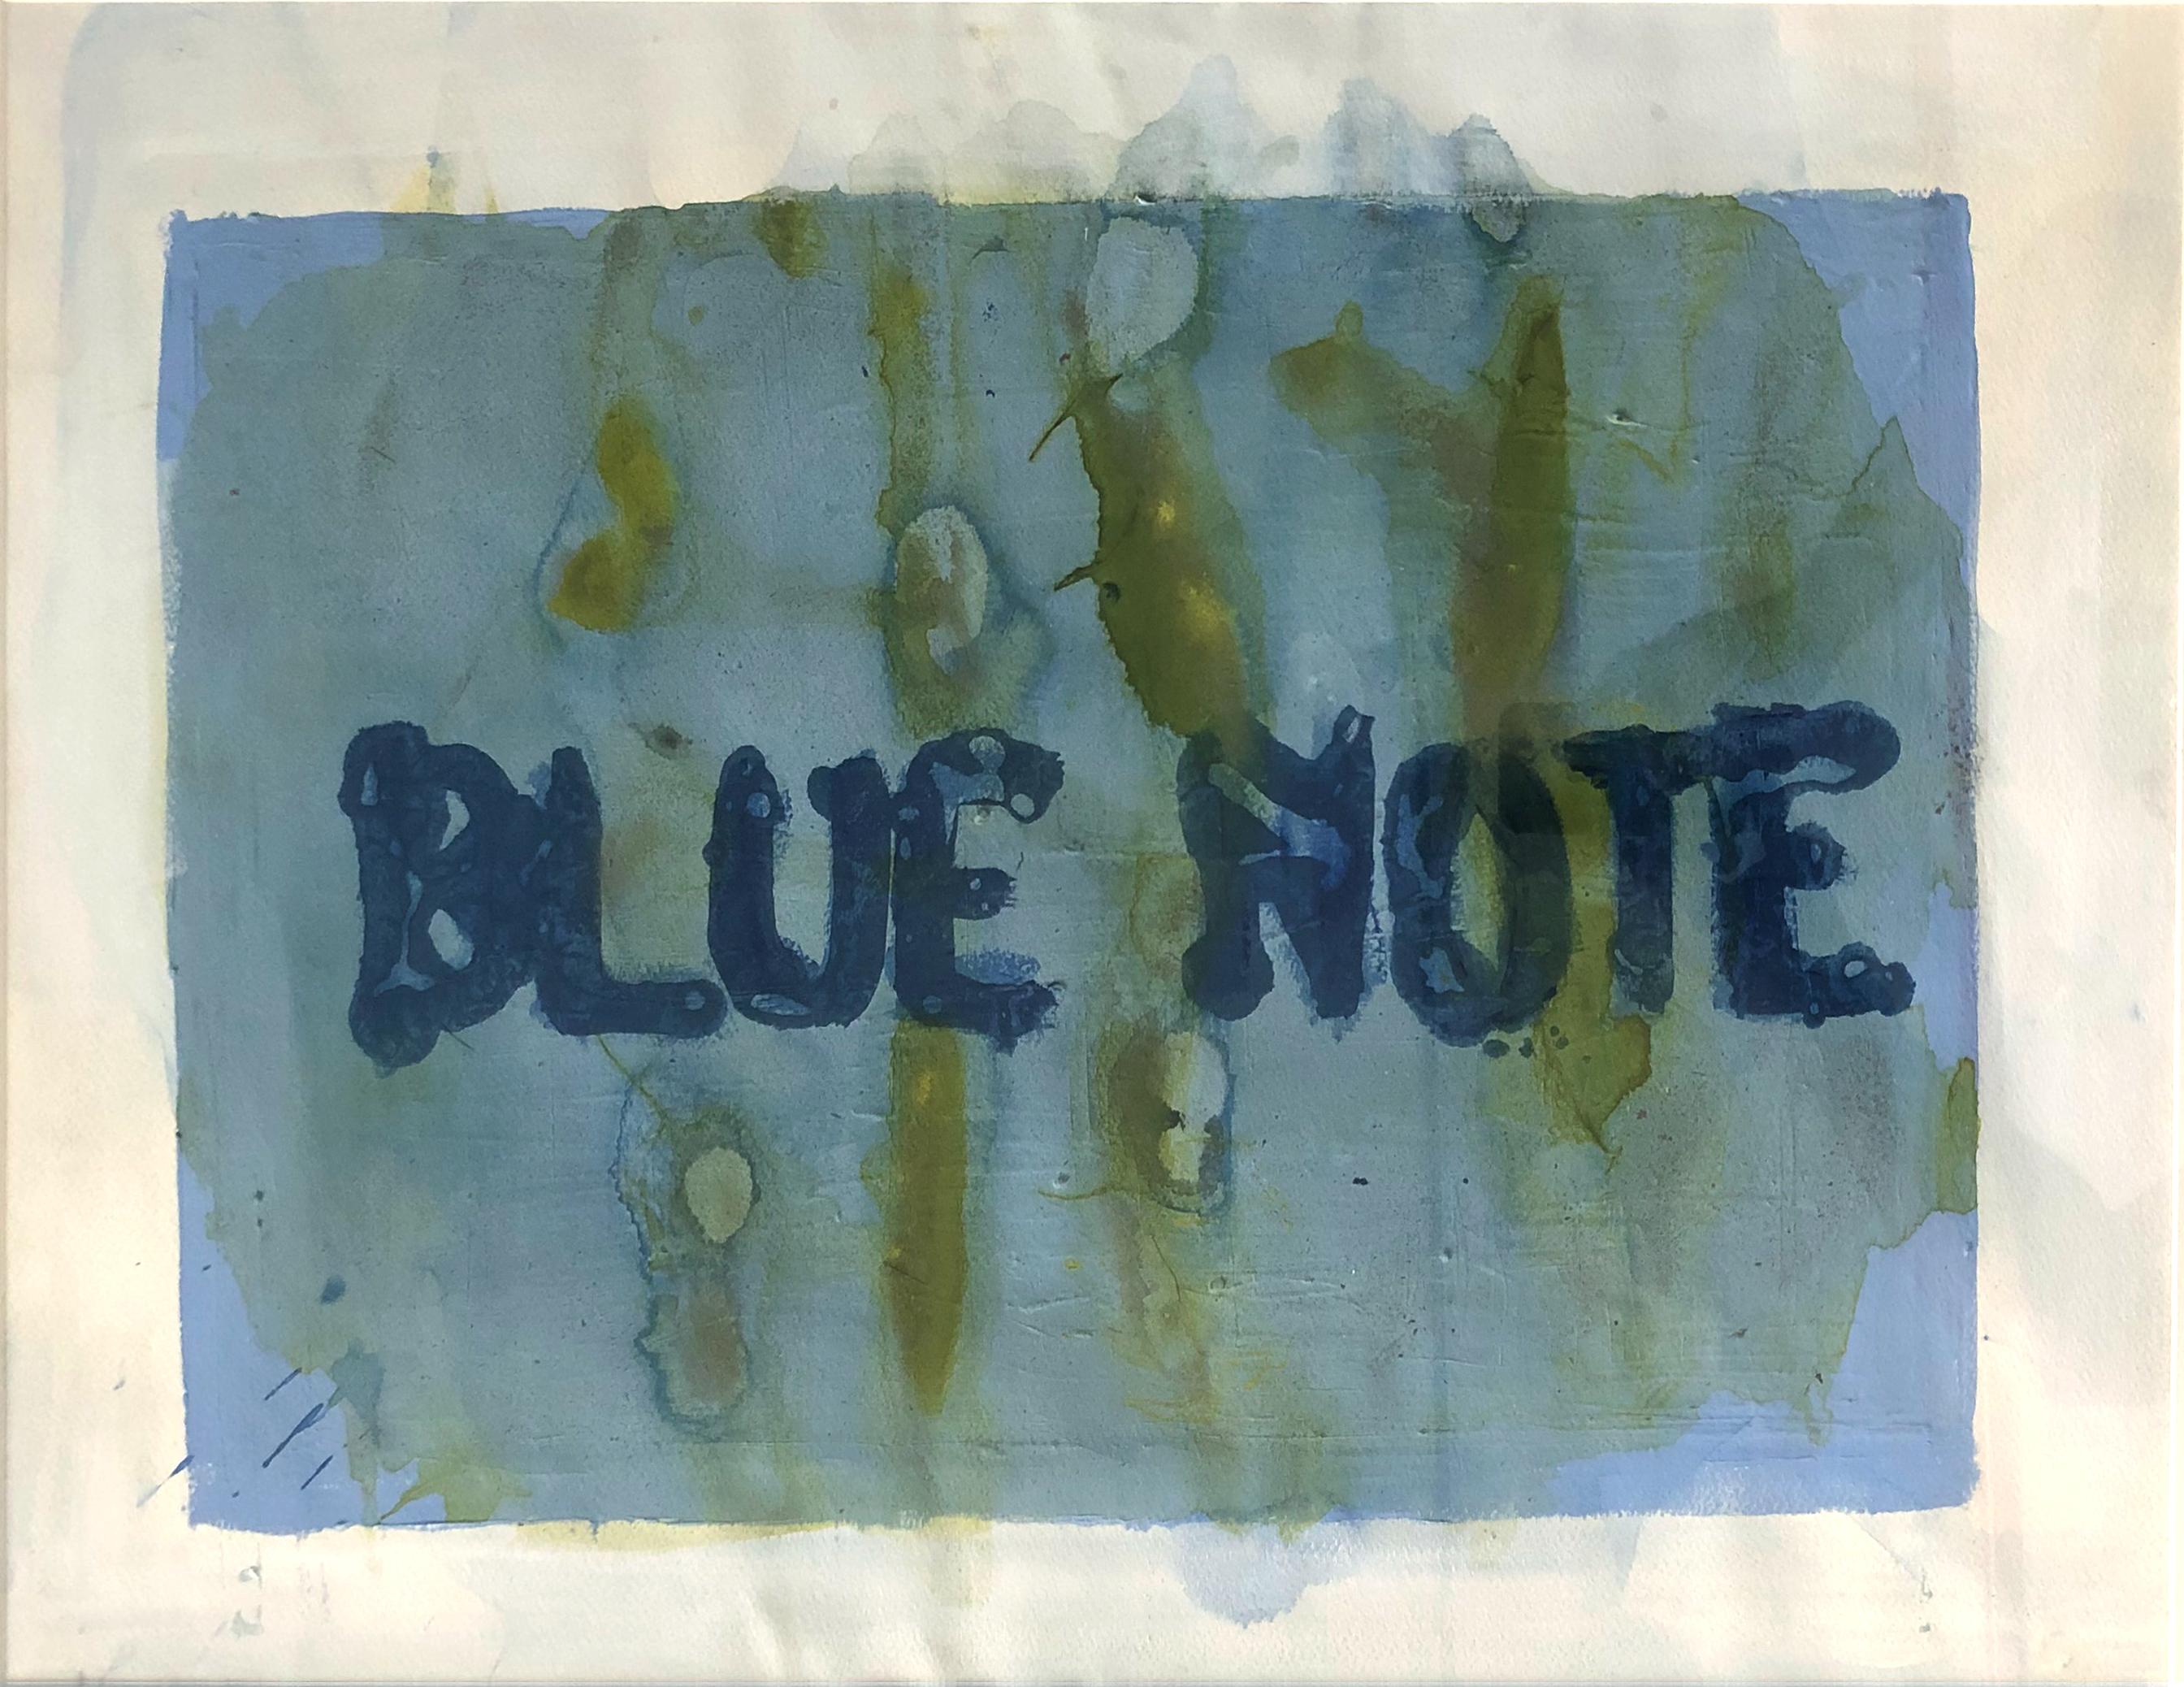 Blue Note, from the Chaleco Quimico series. Abstract painting on Paper - Painting by Sergio Bazan